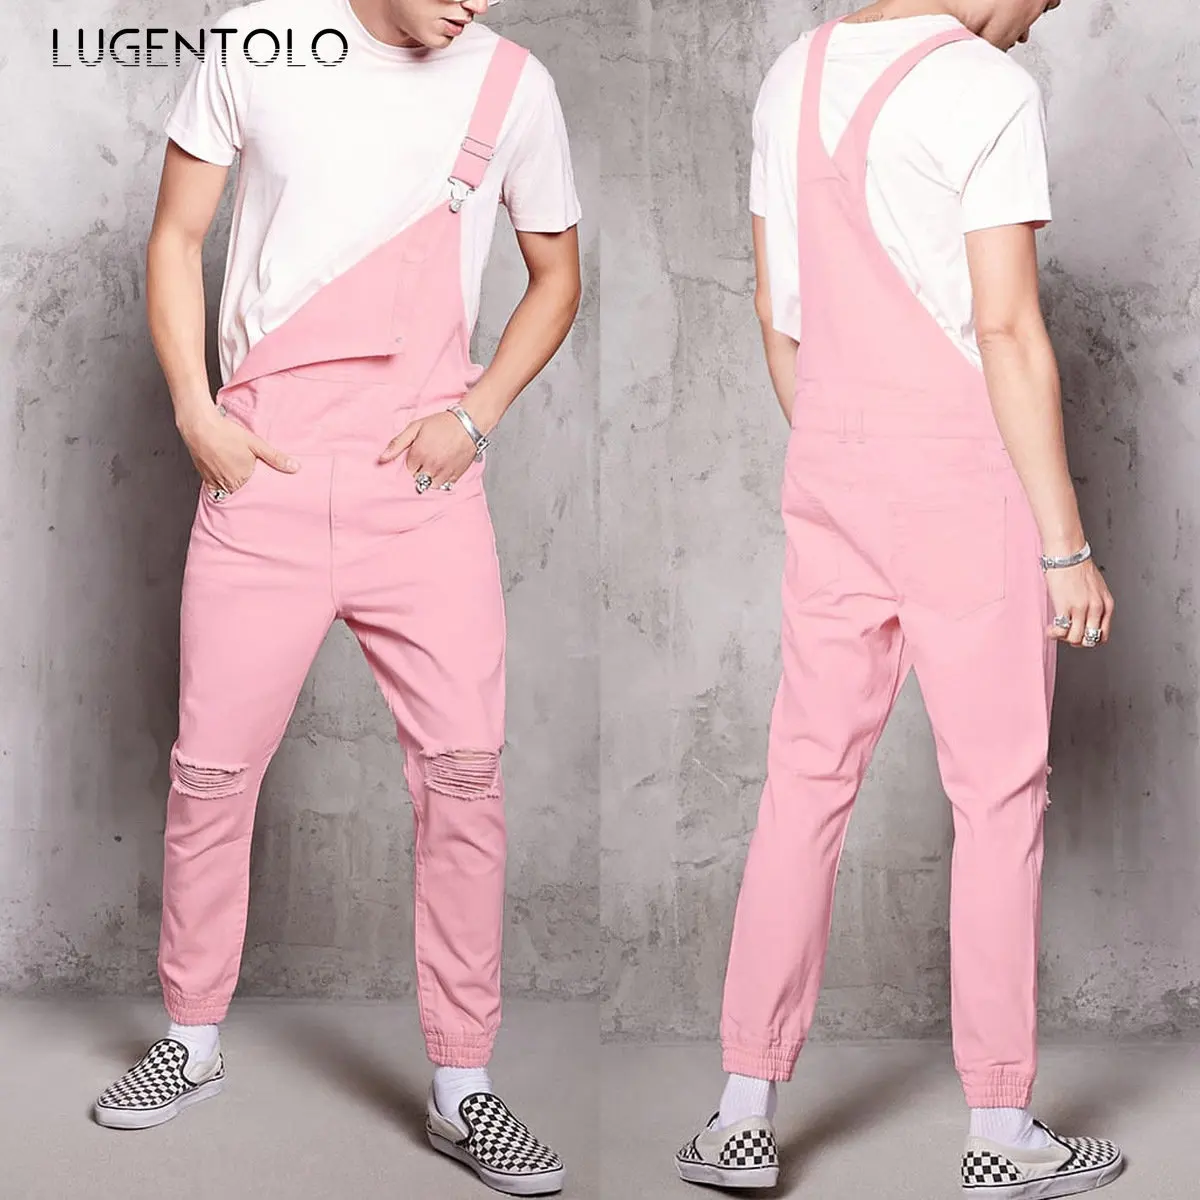 Overalls Pink Solid Hole Cargo Pants Washed Ripped Fashion Casual Mens Street Jeans